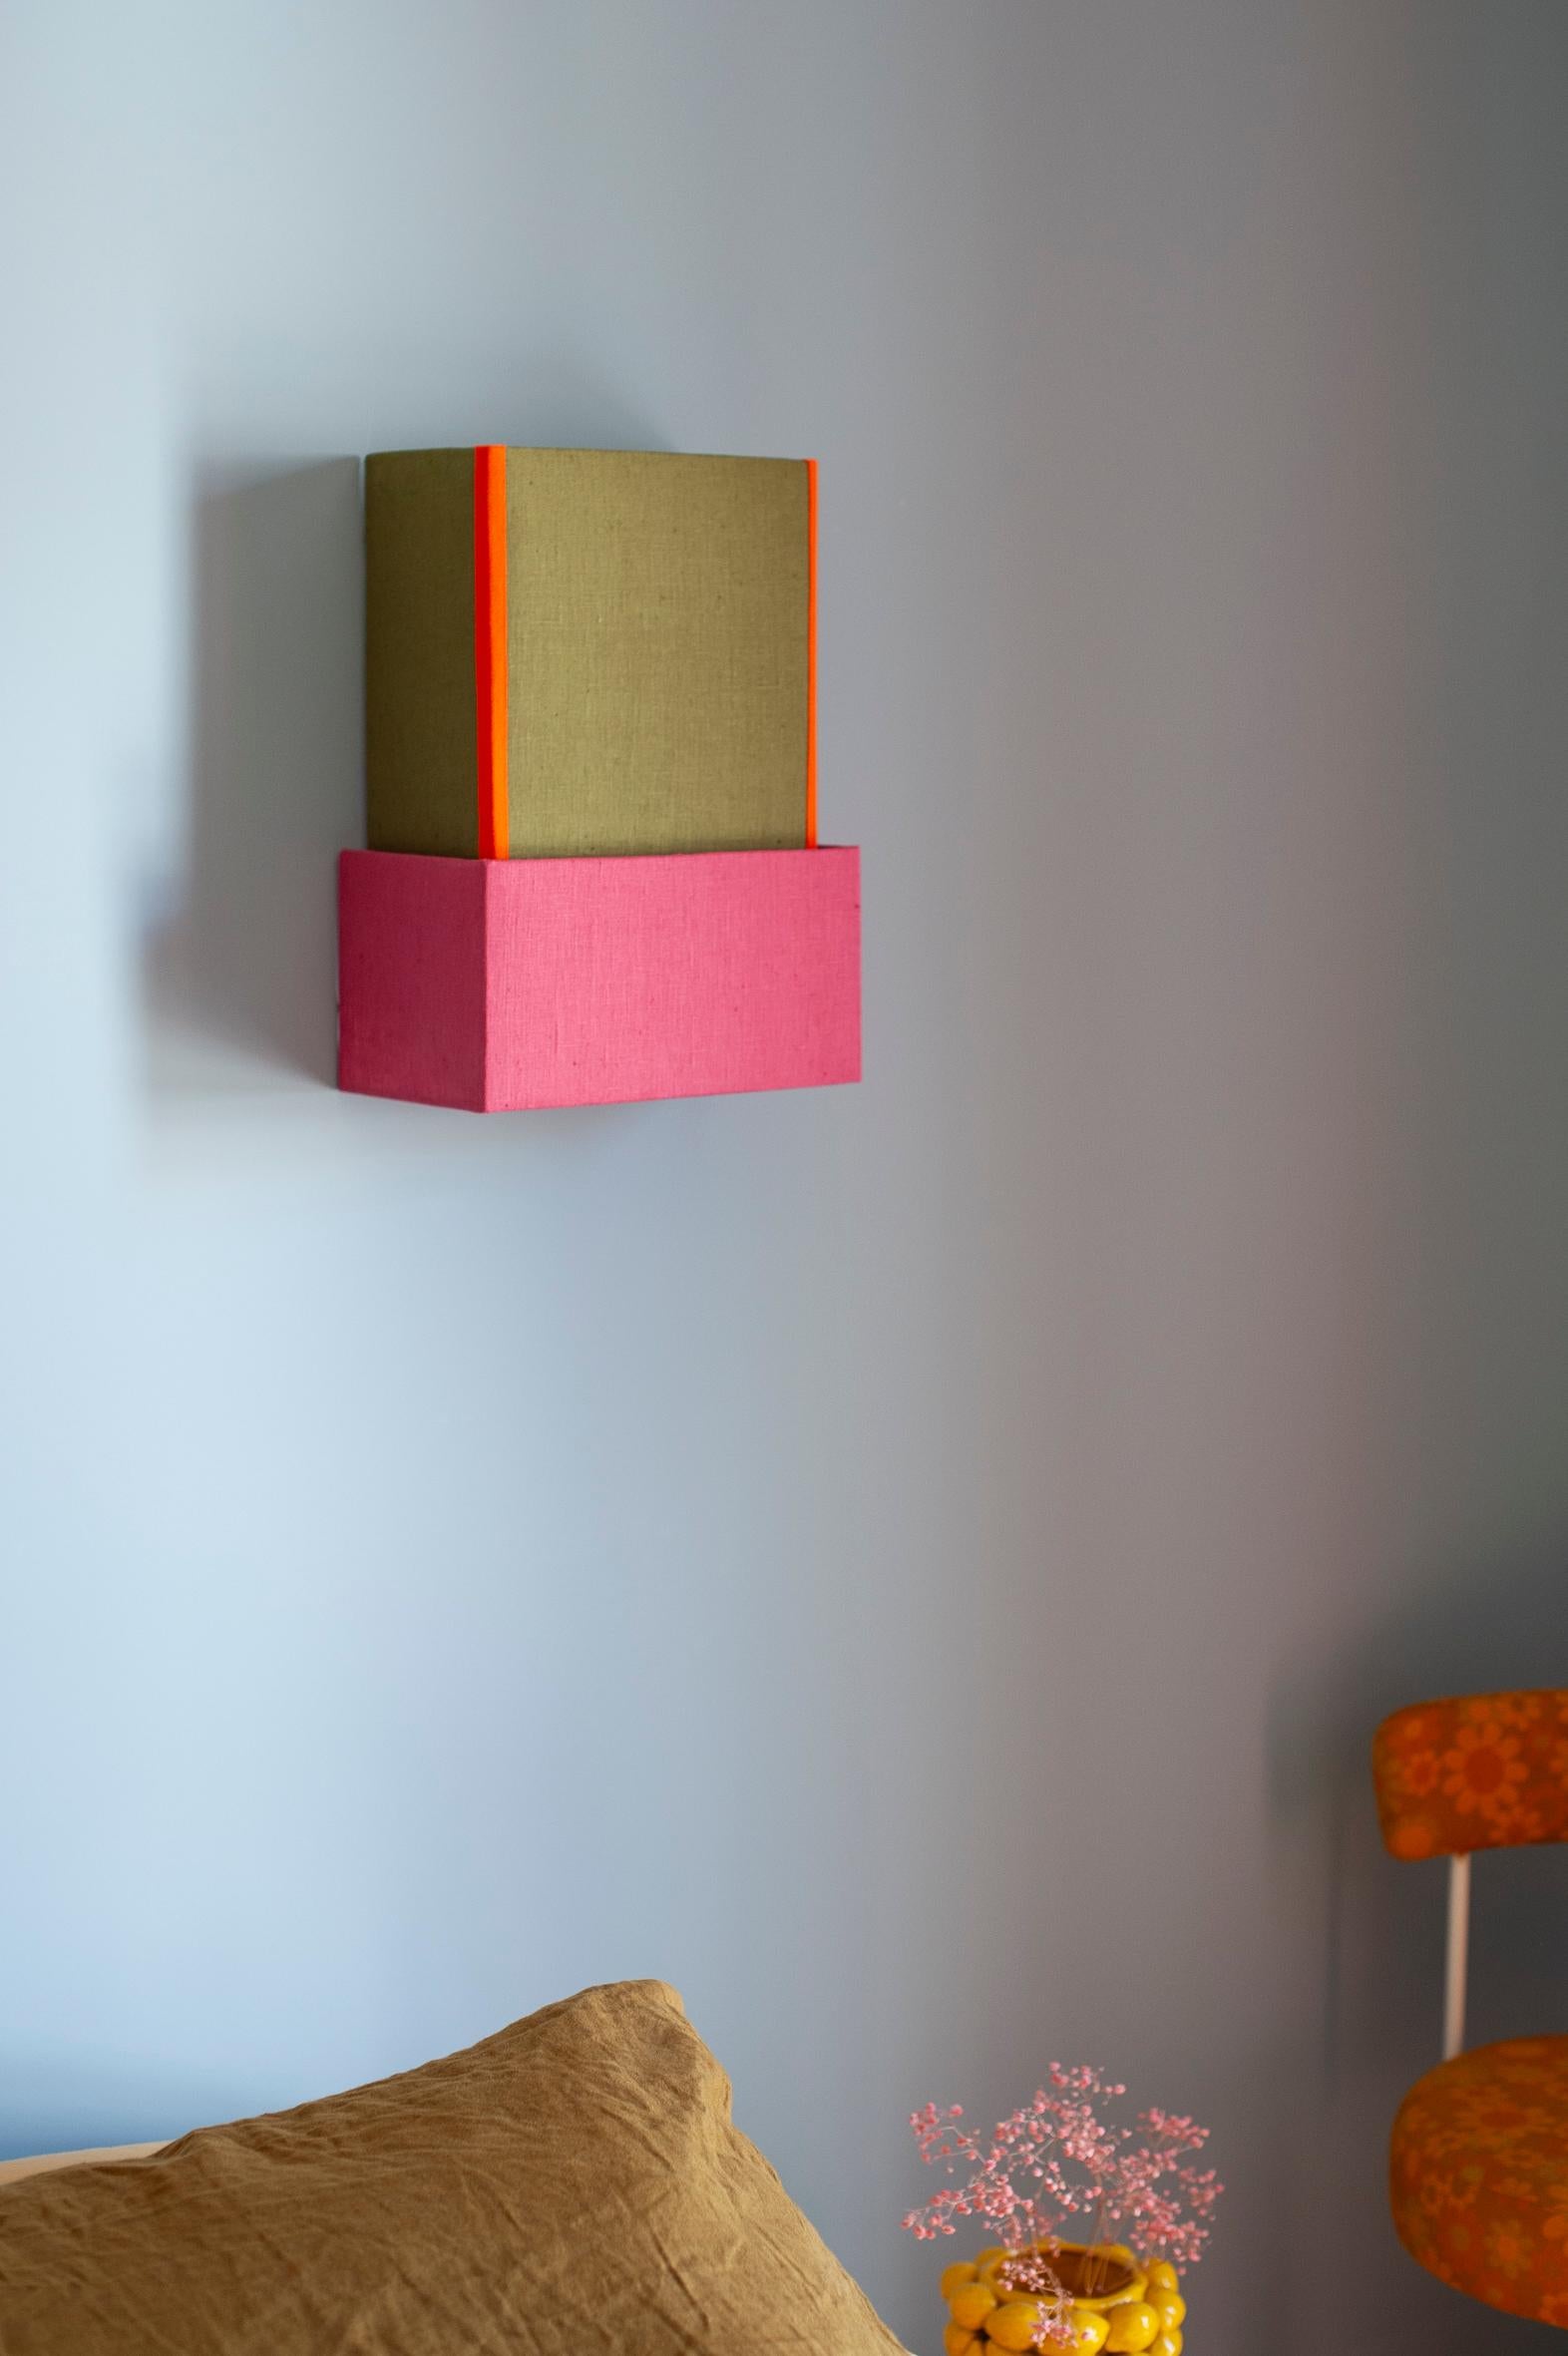 REVERSIBLE WALL LIGHT / handcrafted in Bordeaux, offered in limited edition

Colour: Khaki, pink & orange

Material: Linen & cotton

Dimensions: H40 / L30 / D15

Mounting: Attaches to the wall using a metal bar located on the back of the